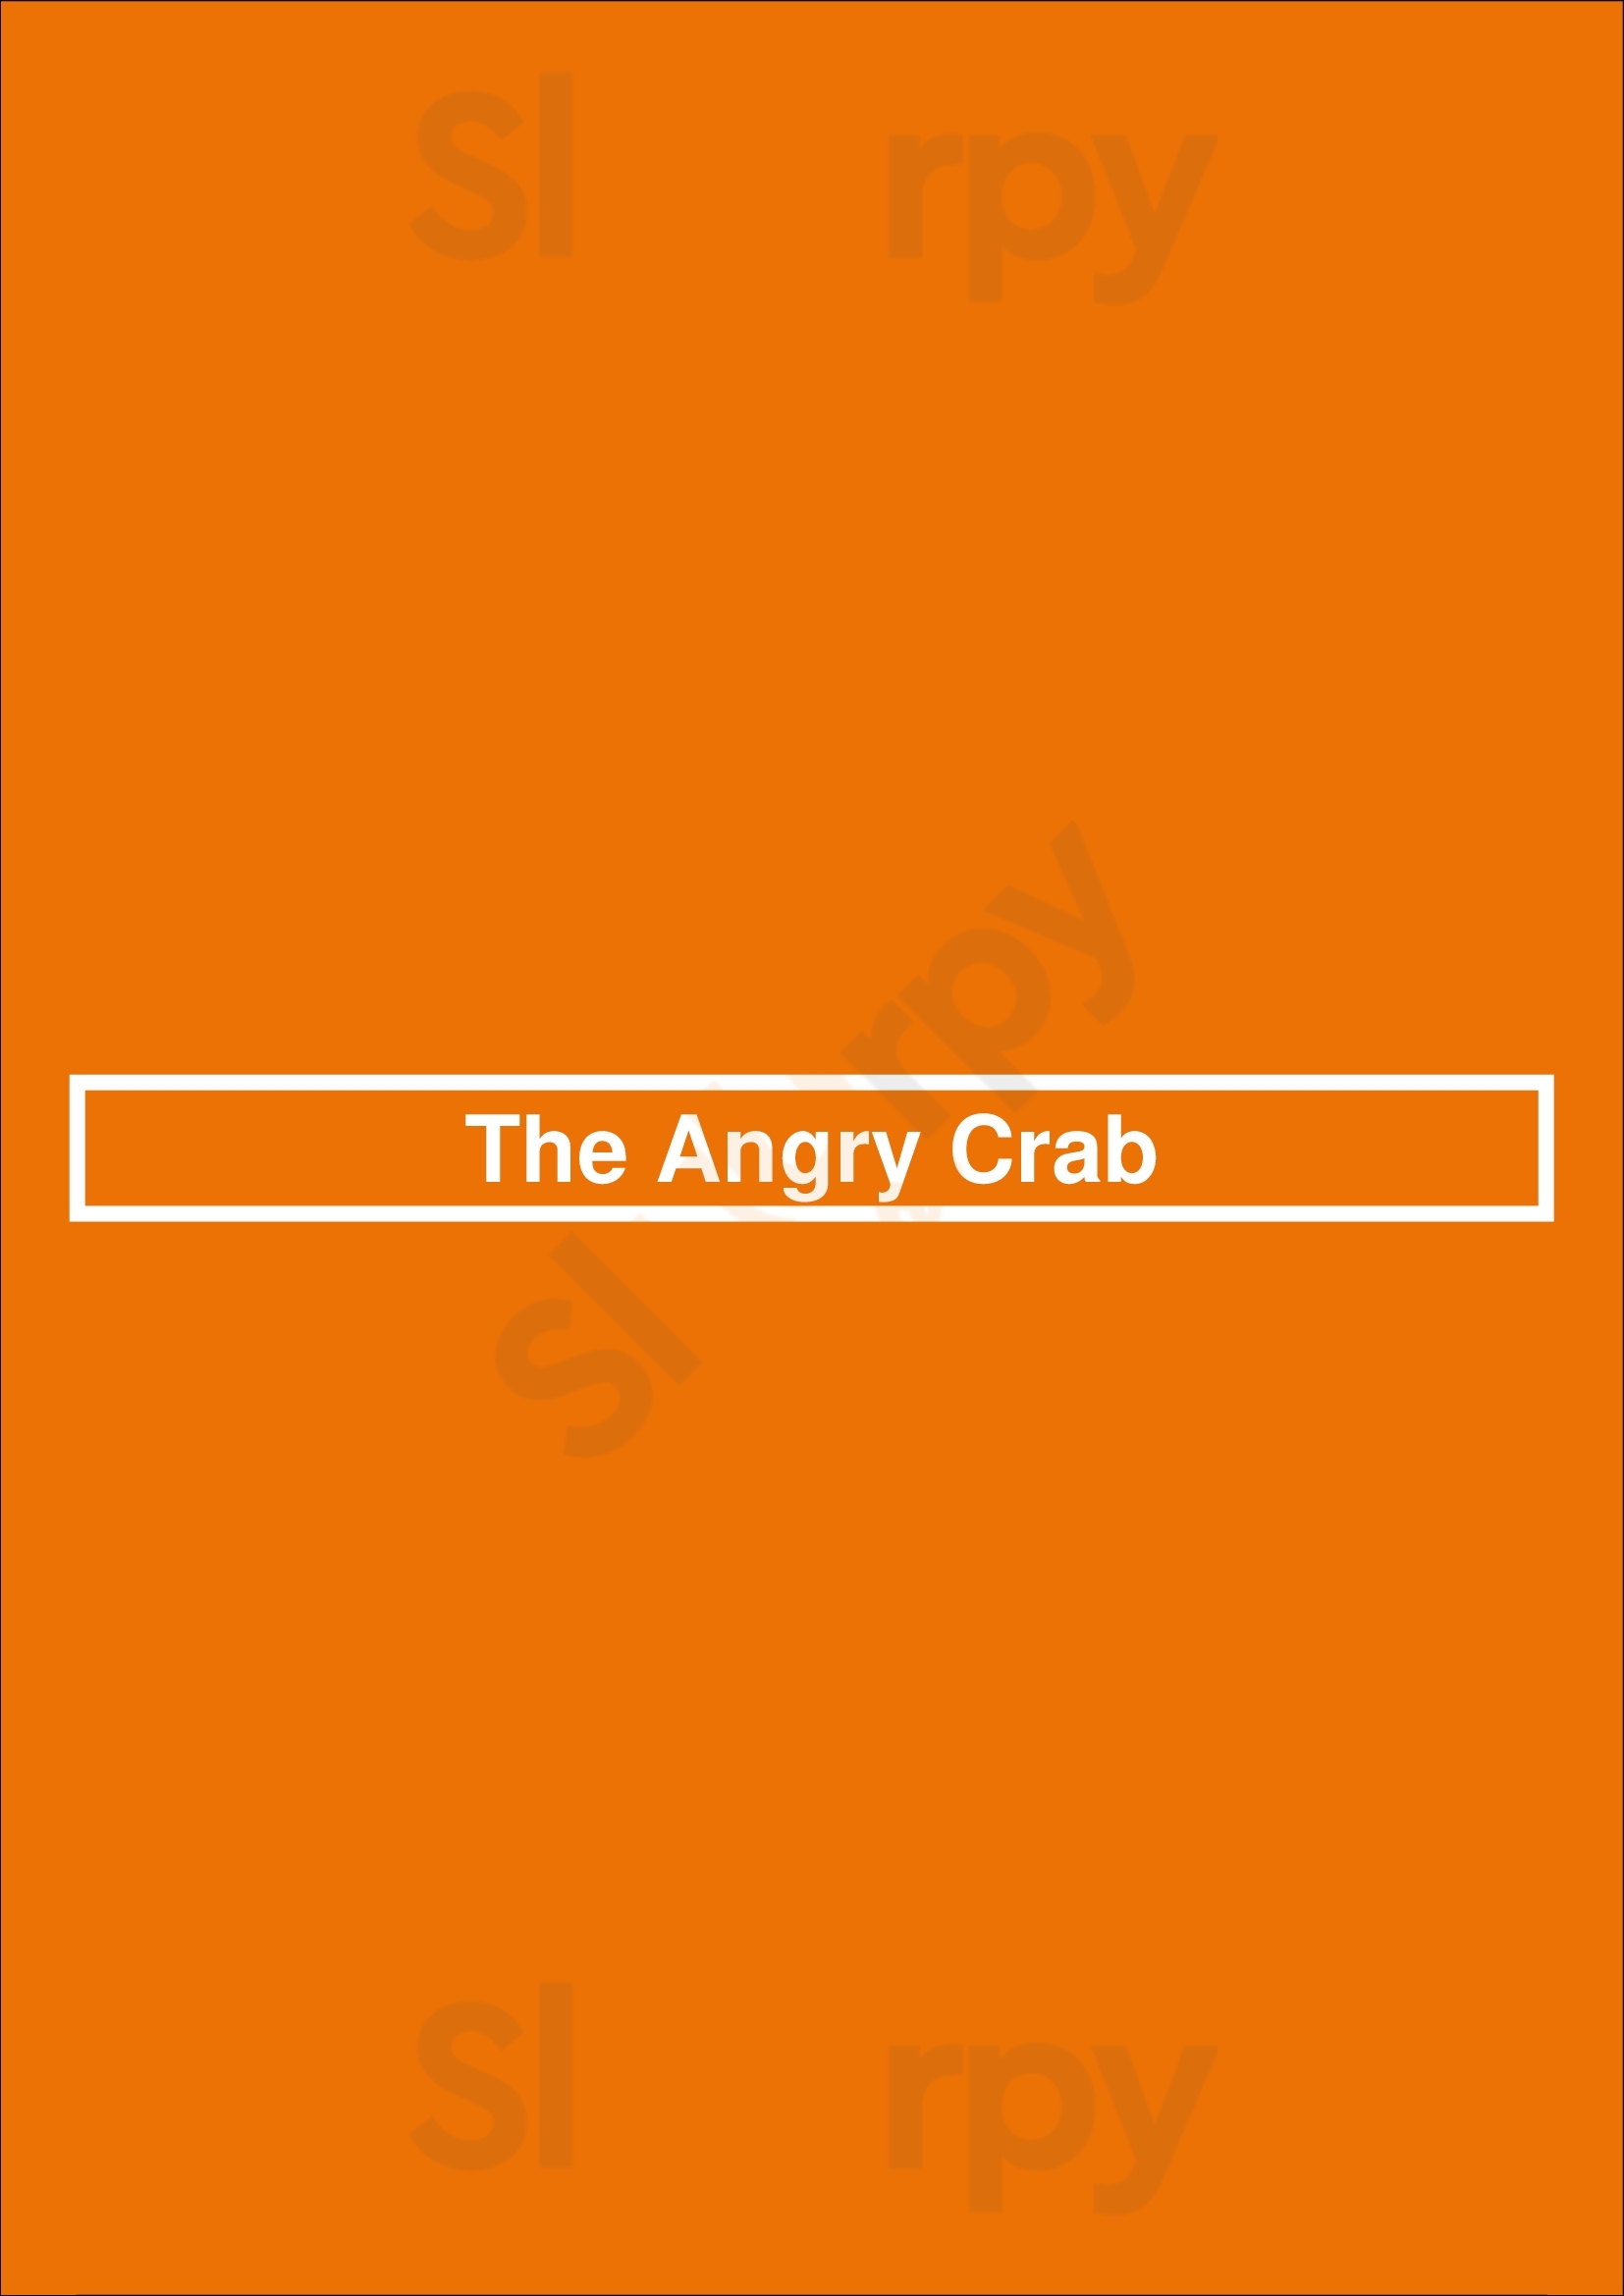 The Angry Crab Chicago Menu - 1